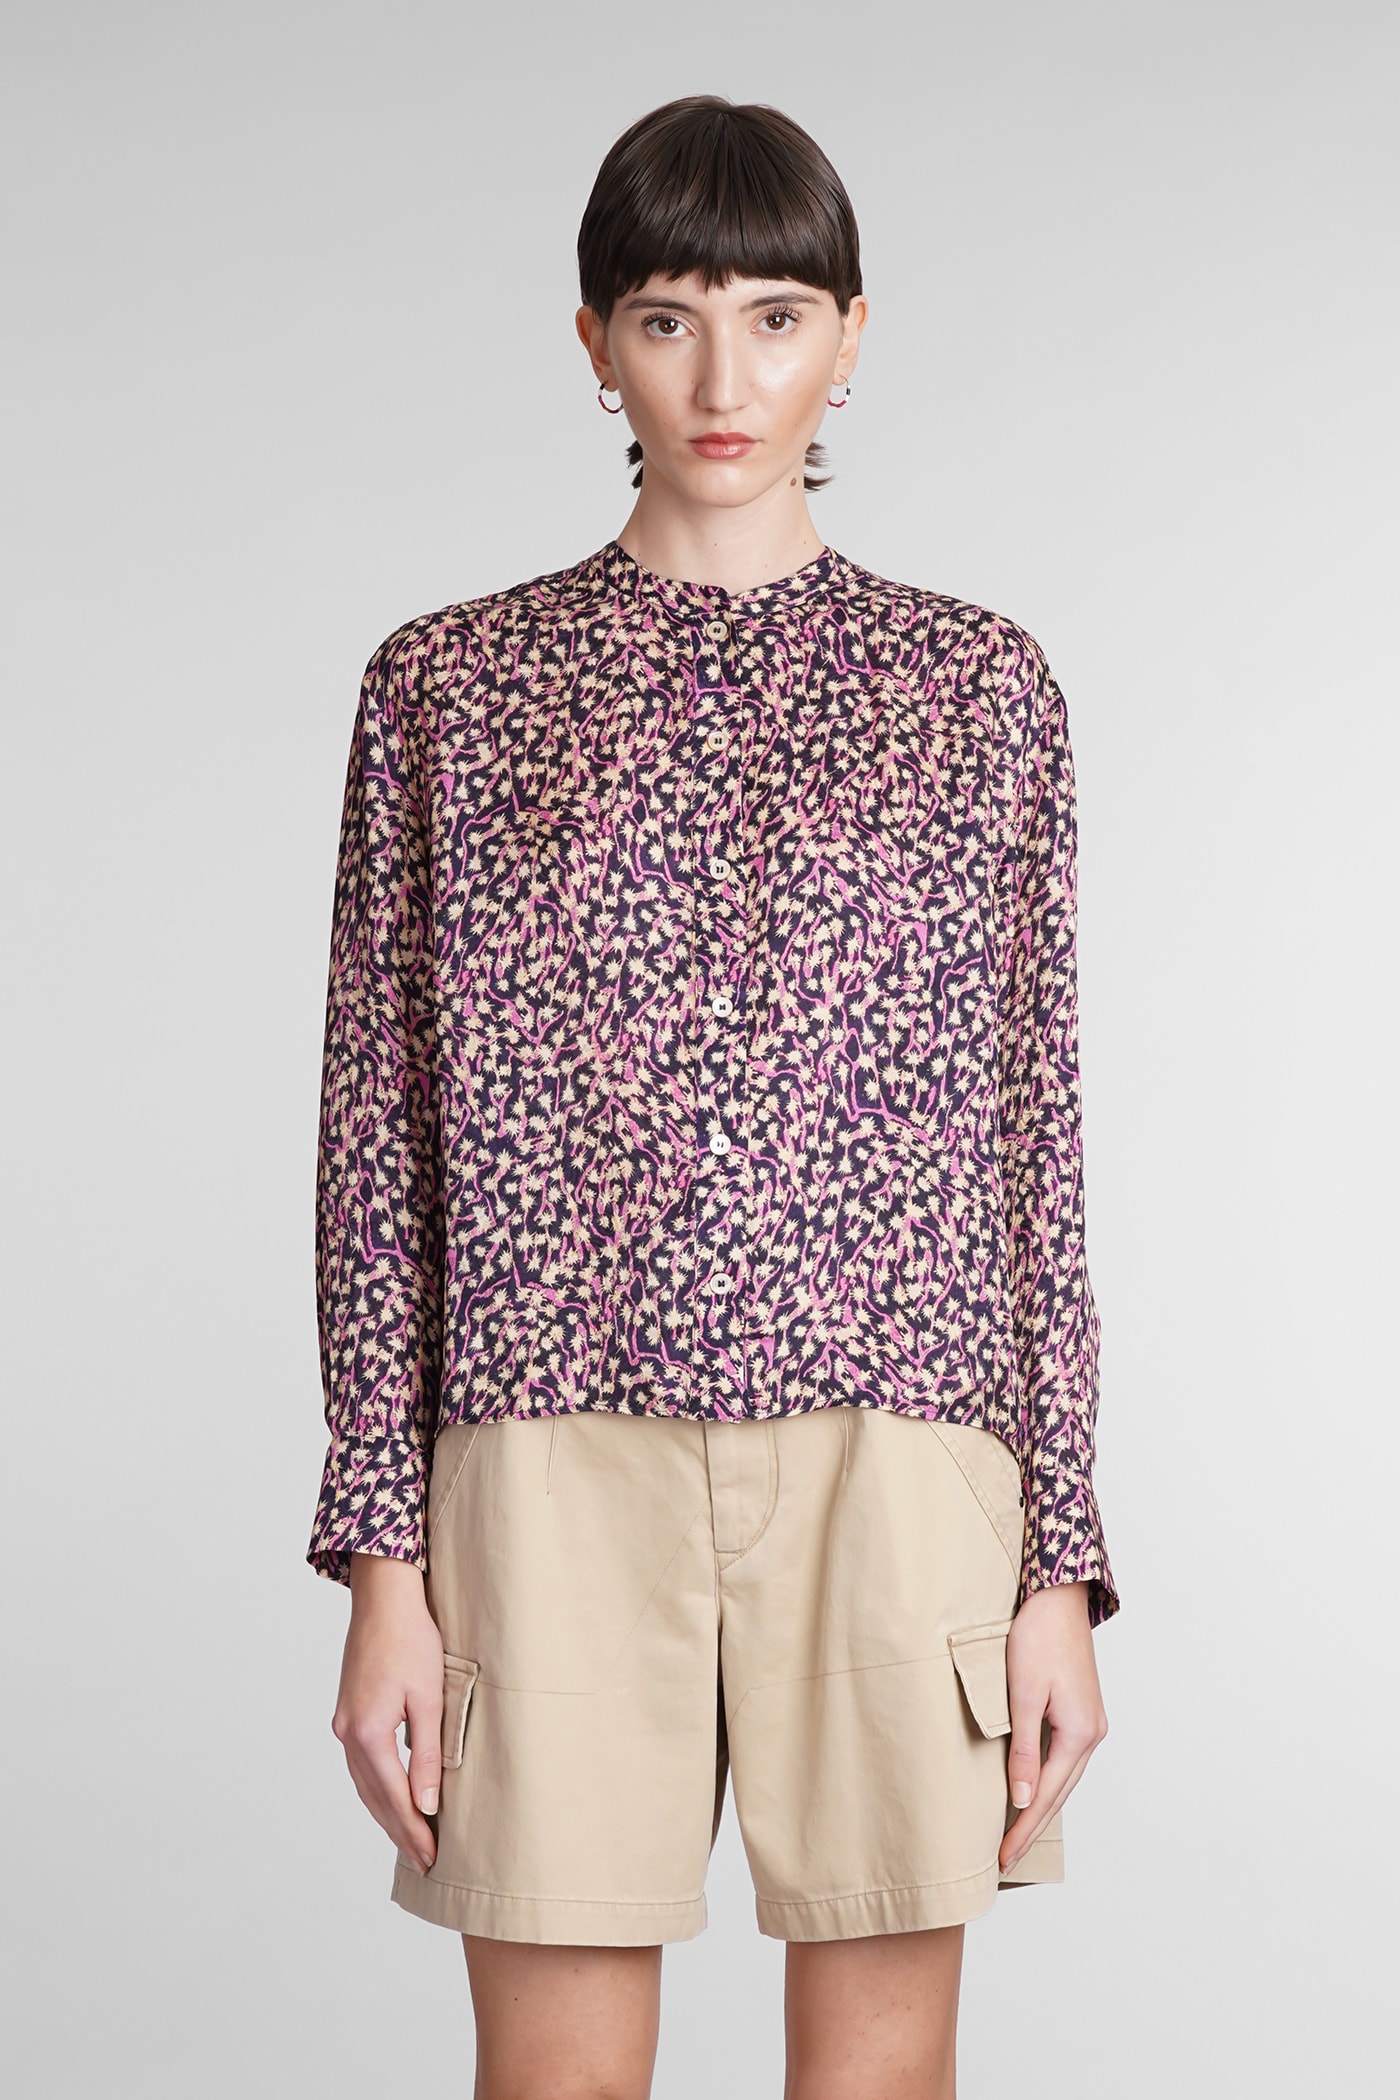 ISABEL MARANT LEIDY SHIRT IN MULTICOLOR VISCOSE